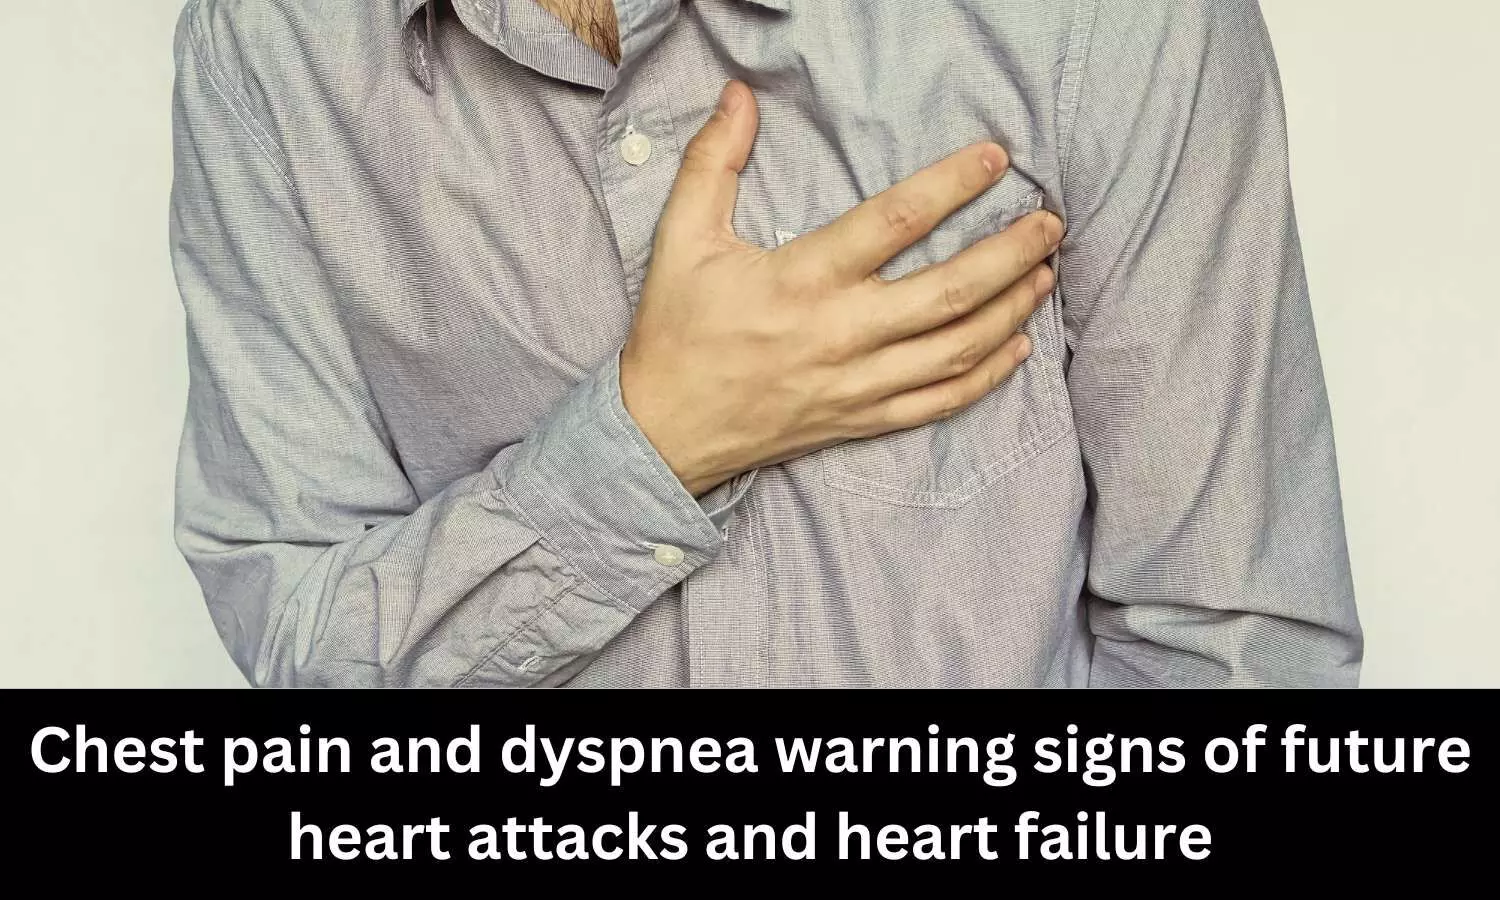 Chest pain, dyspnea warning signs of future heart attacks, heart failure